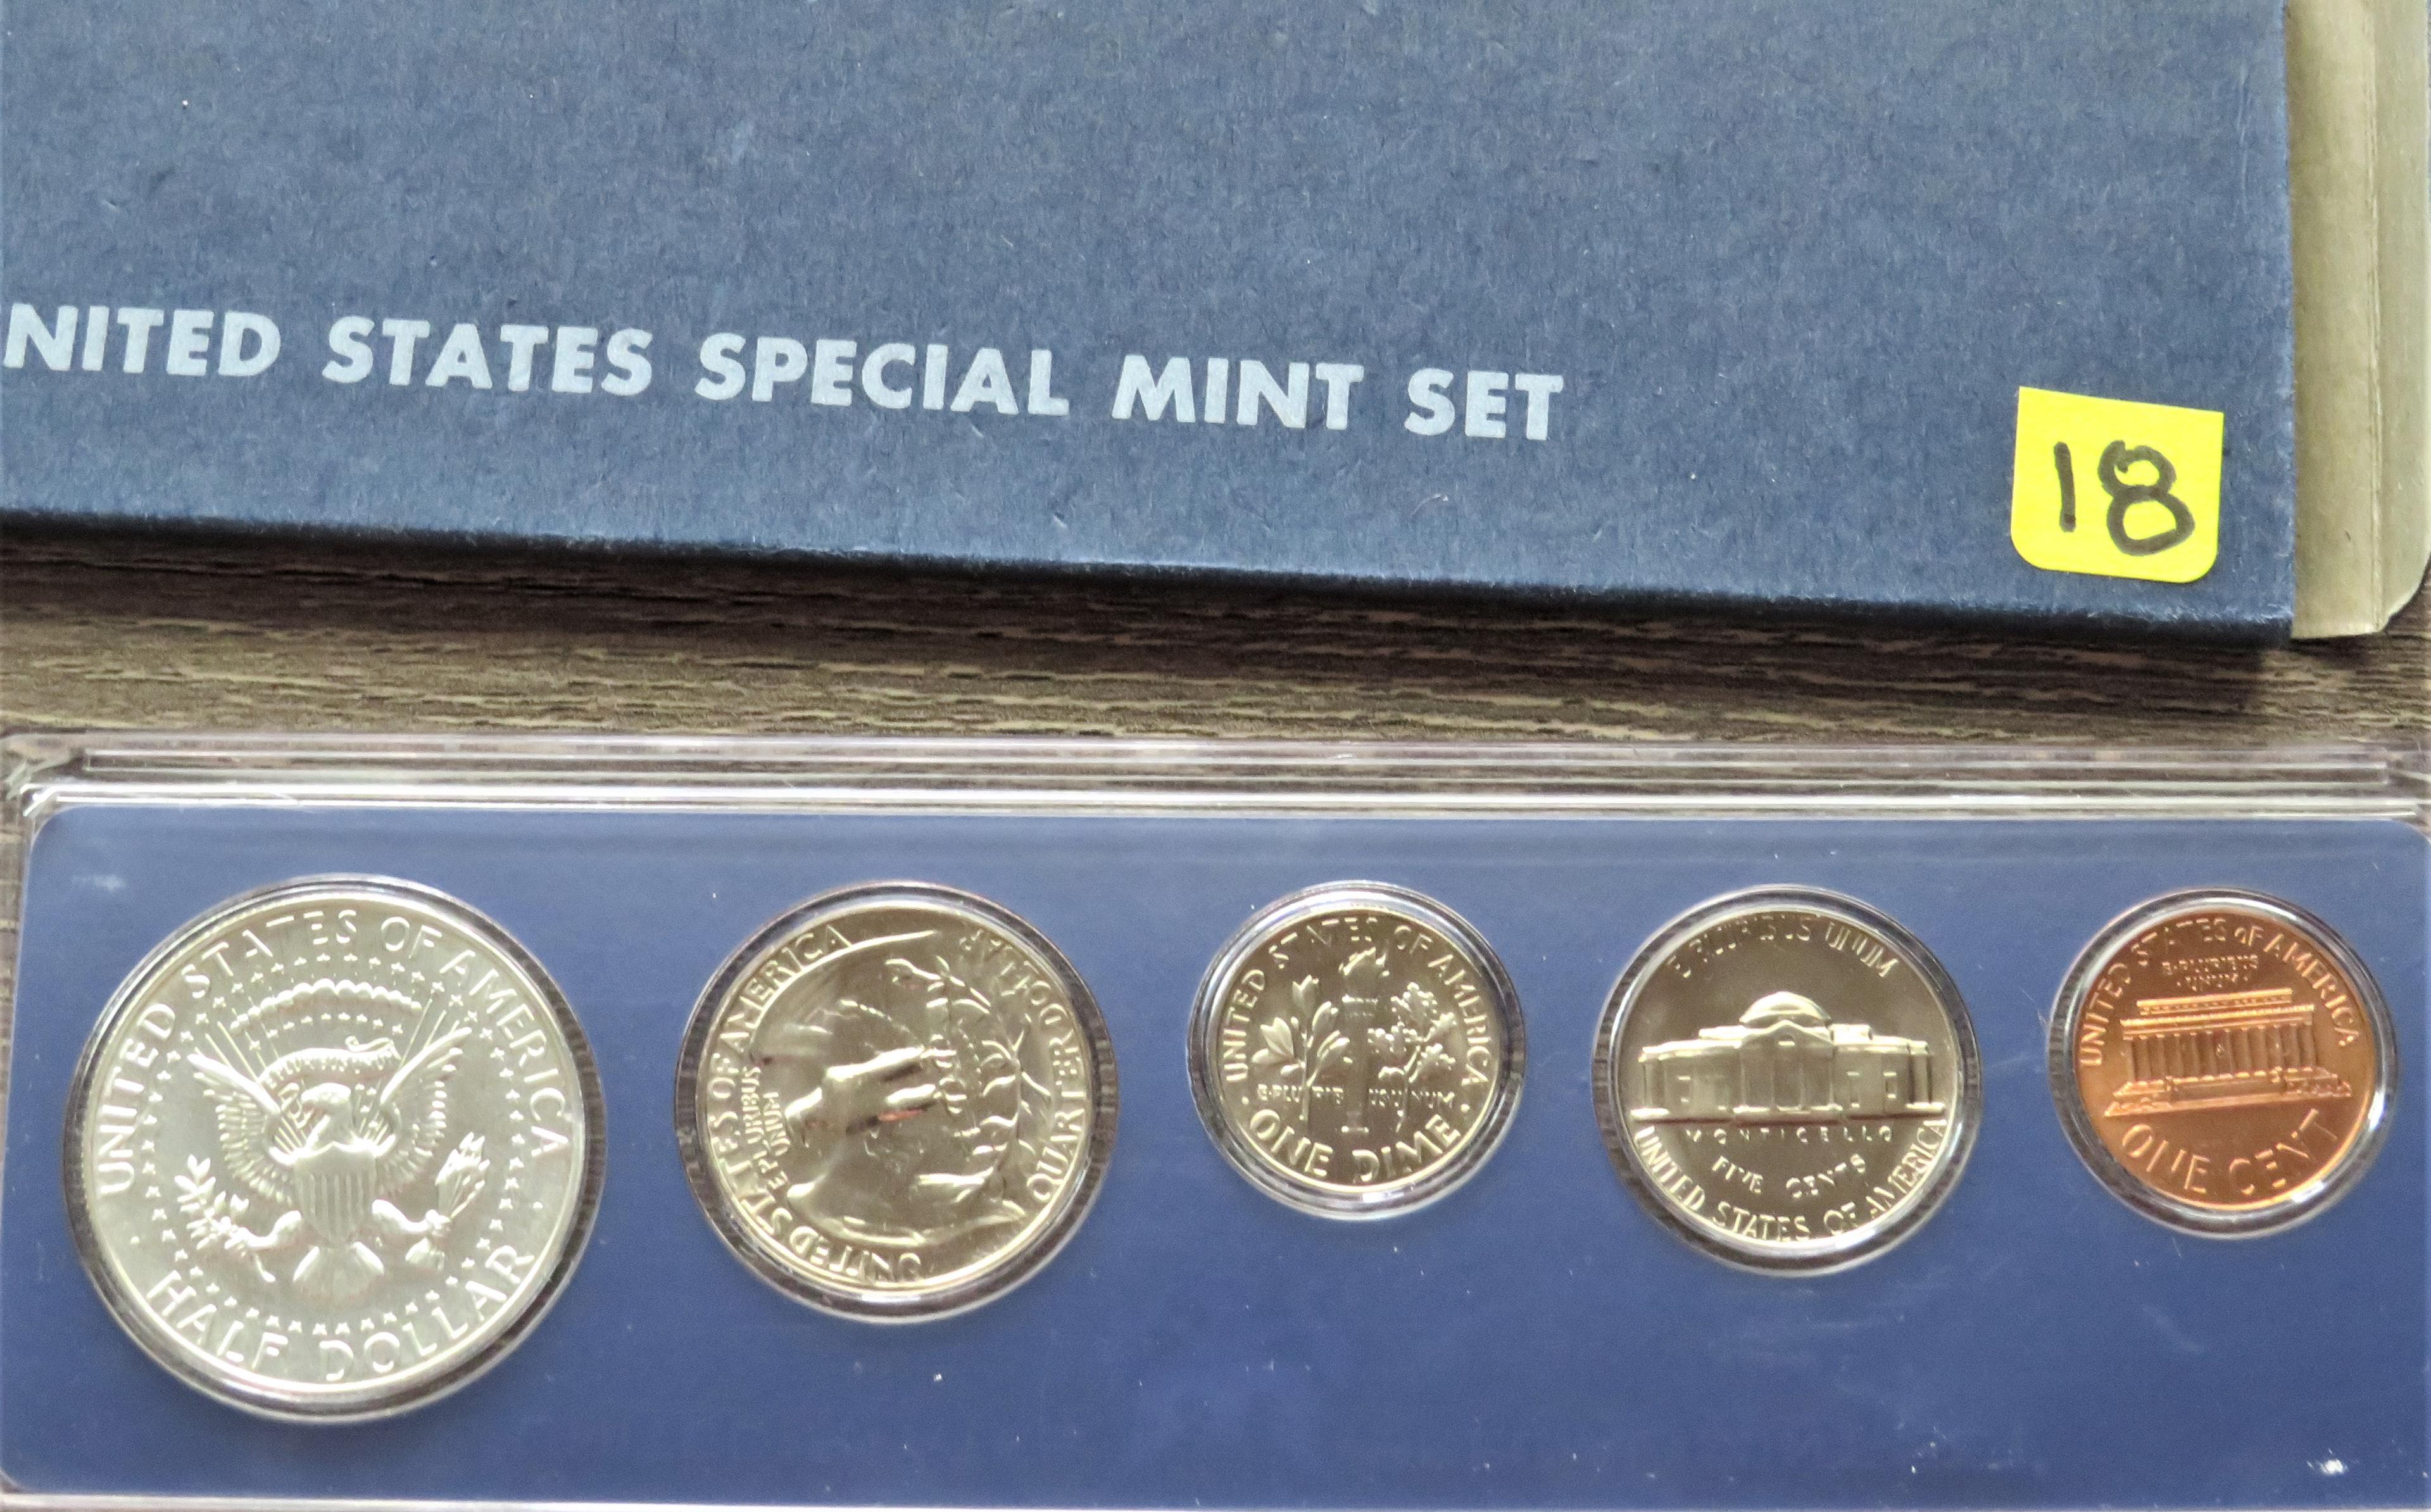 1996 United States Special Mint Set